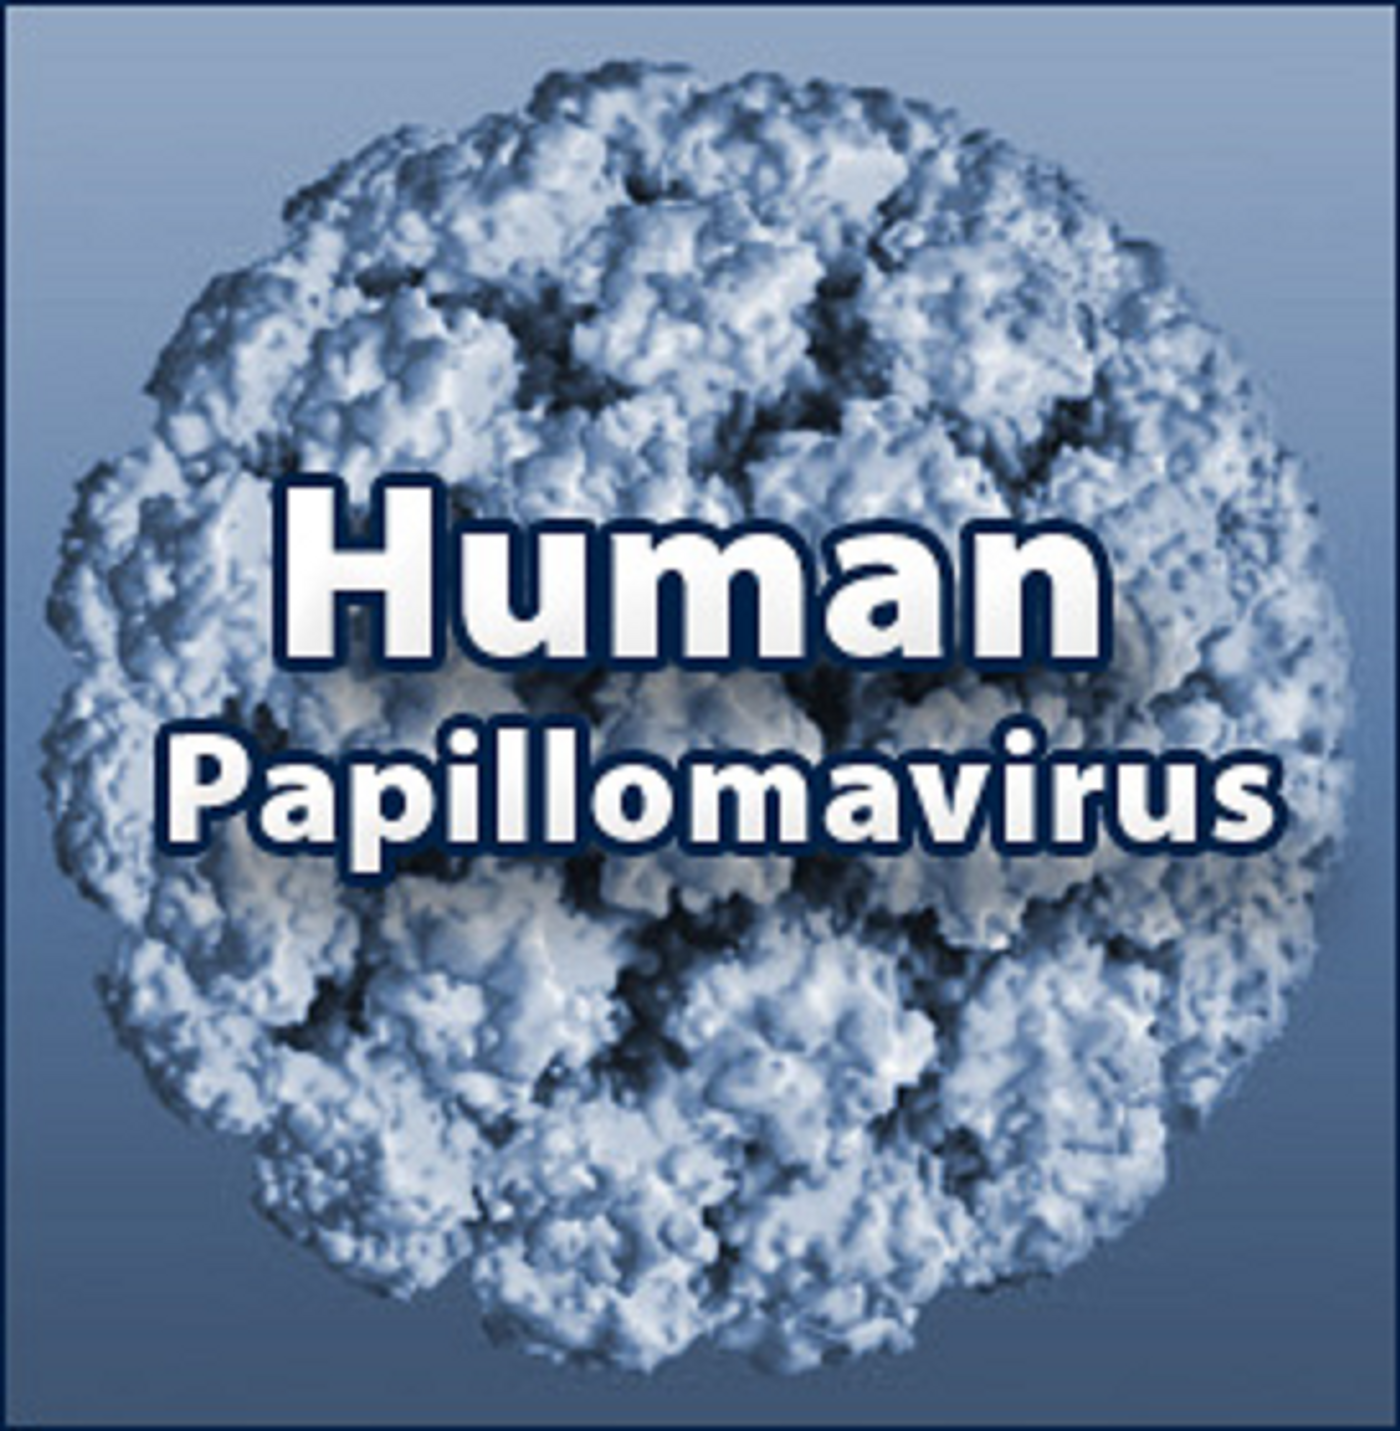 Human Papilloma Virus (HPV) is the fourth most common type of cancer in women.